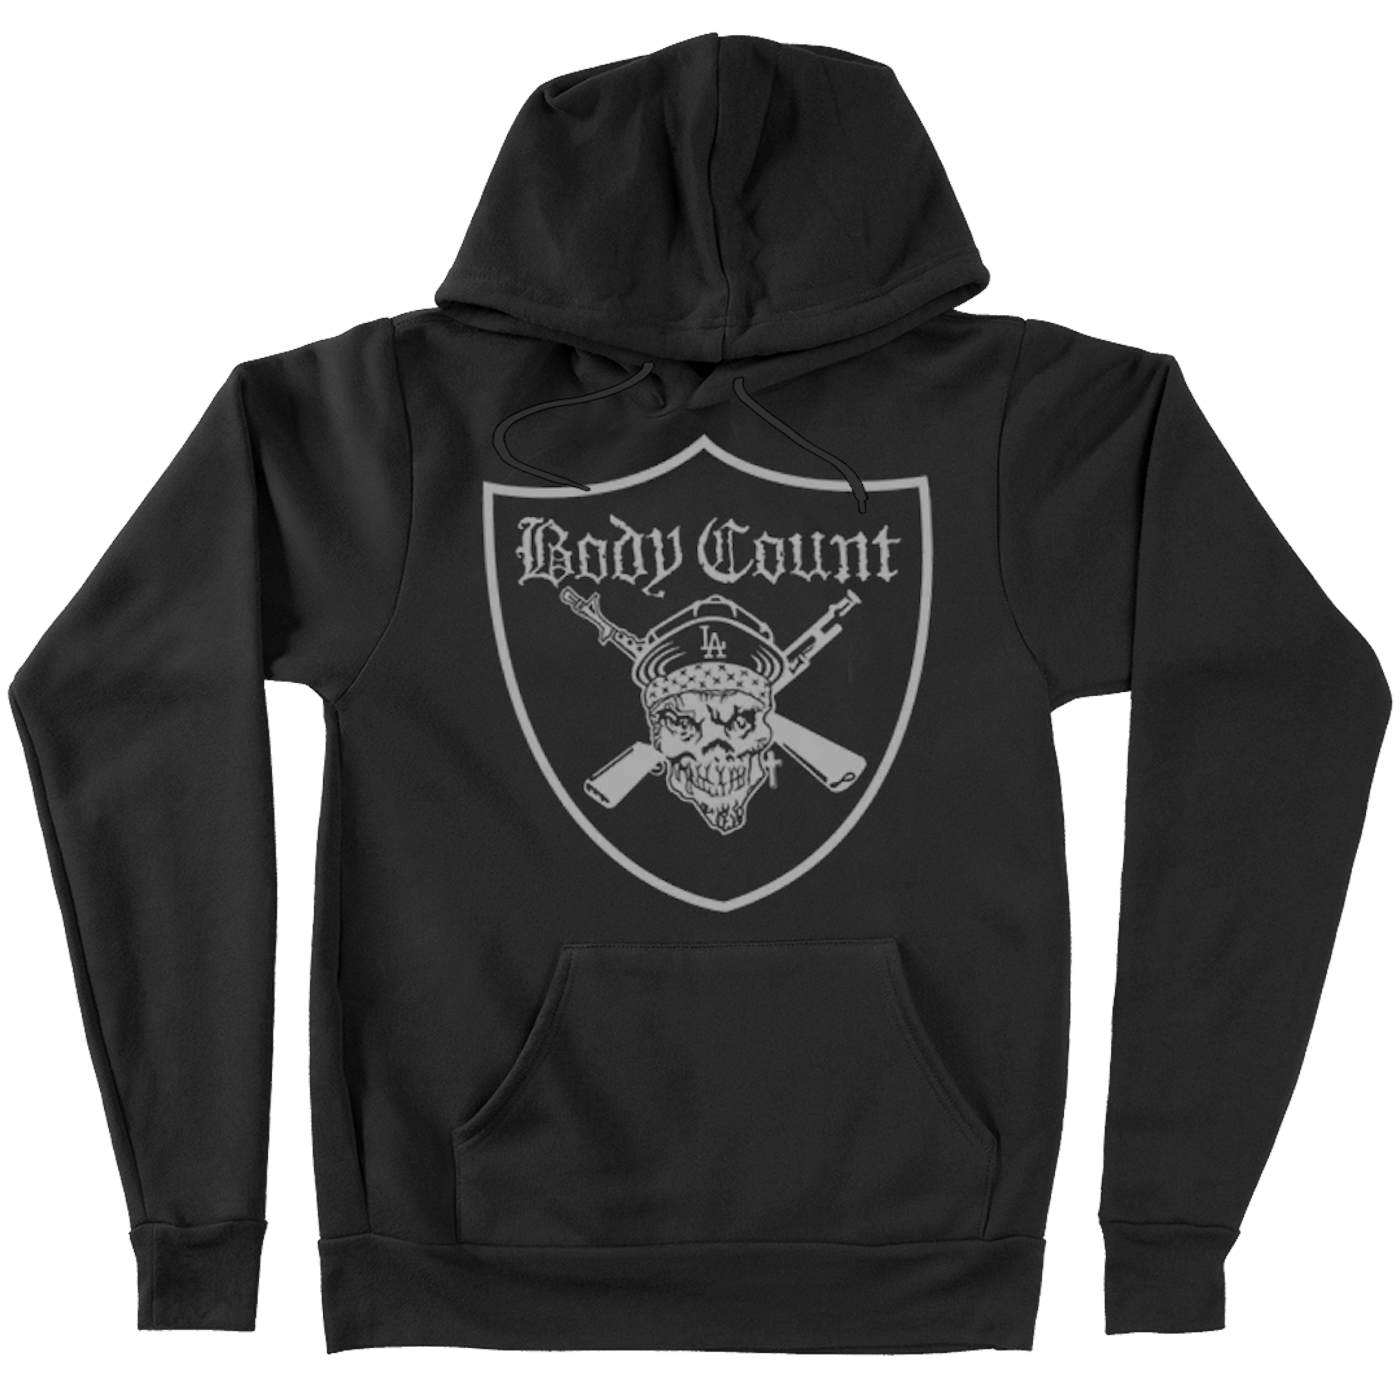 Body Count "Pirate Logo" Pullover Hoodie